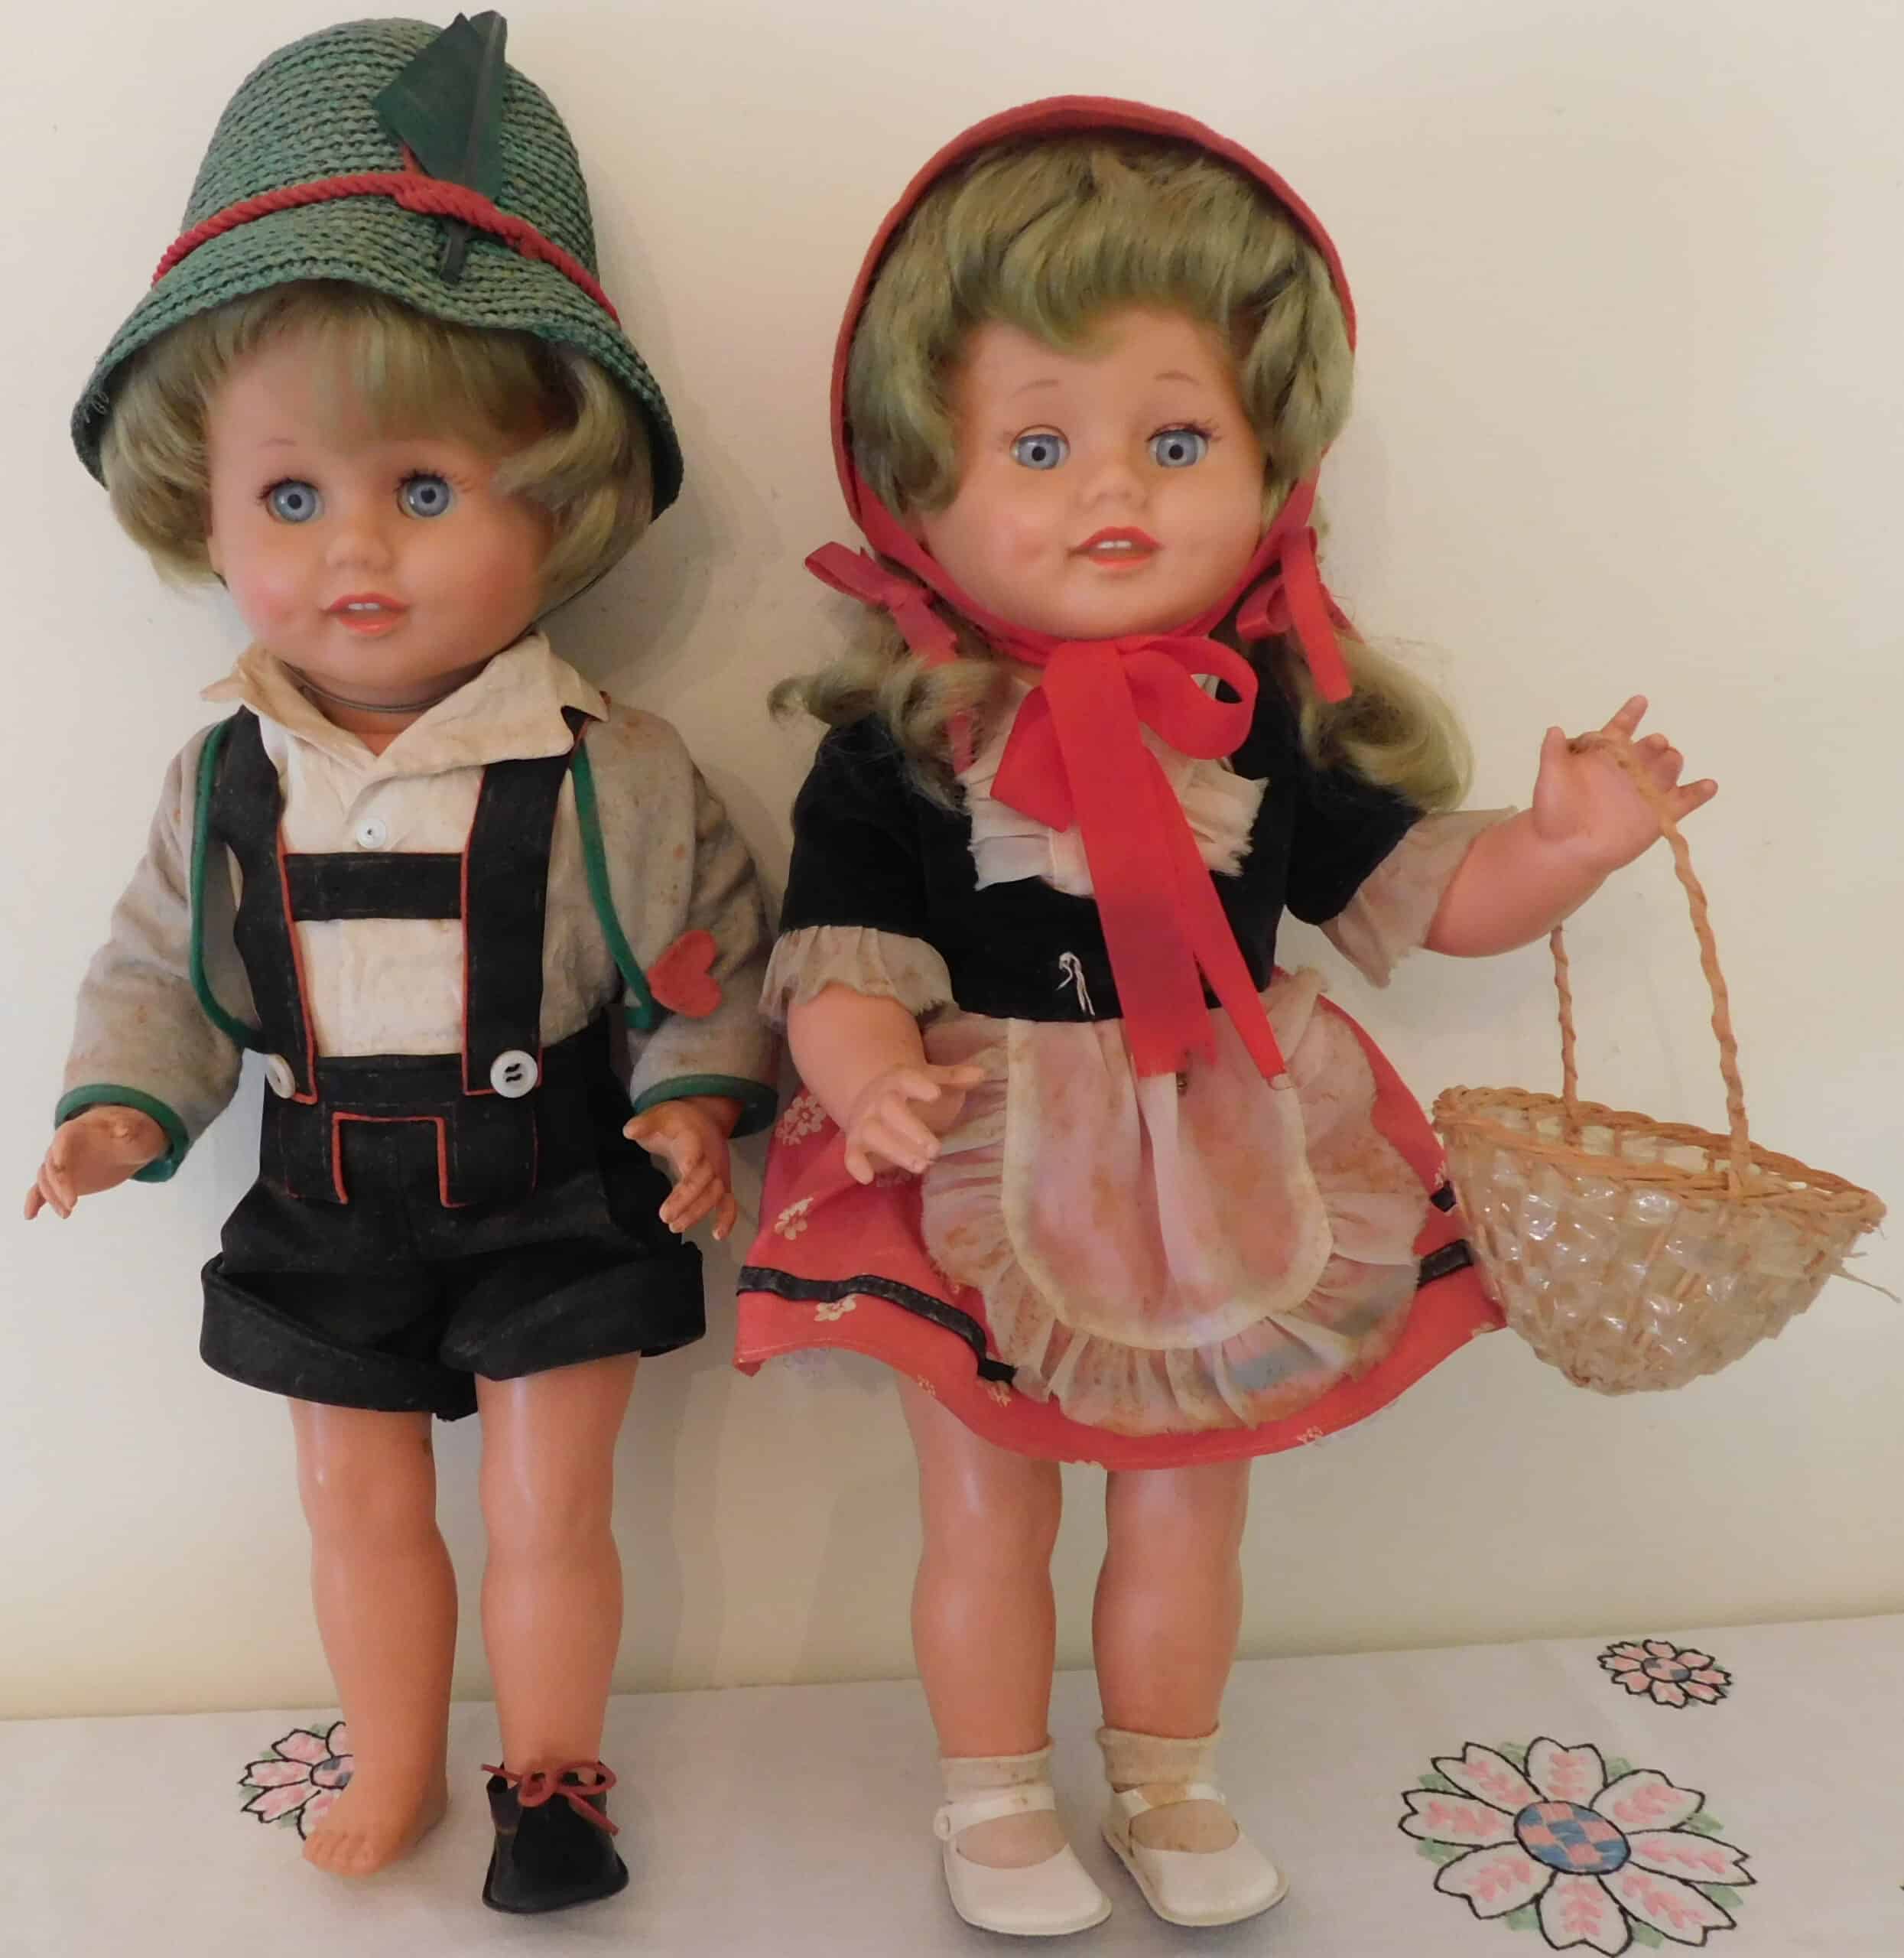 Hansel and Gretel dolls, two special dolls from childhood for Julia Nunnally Duncan.